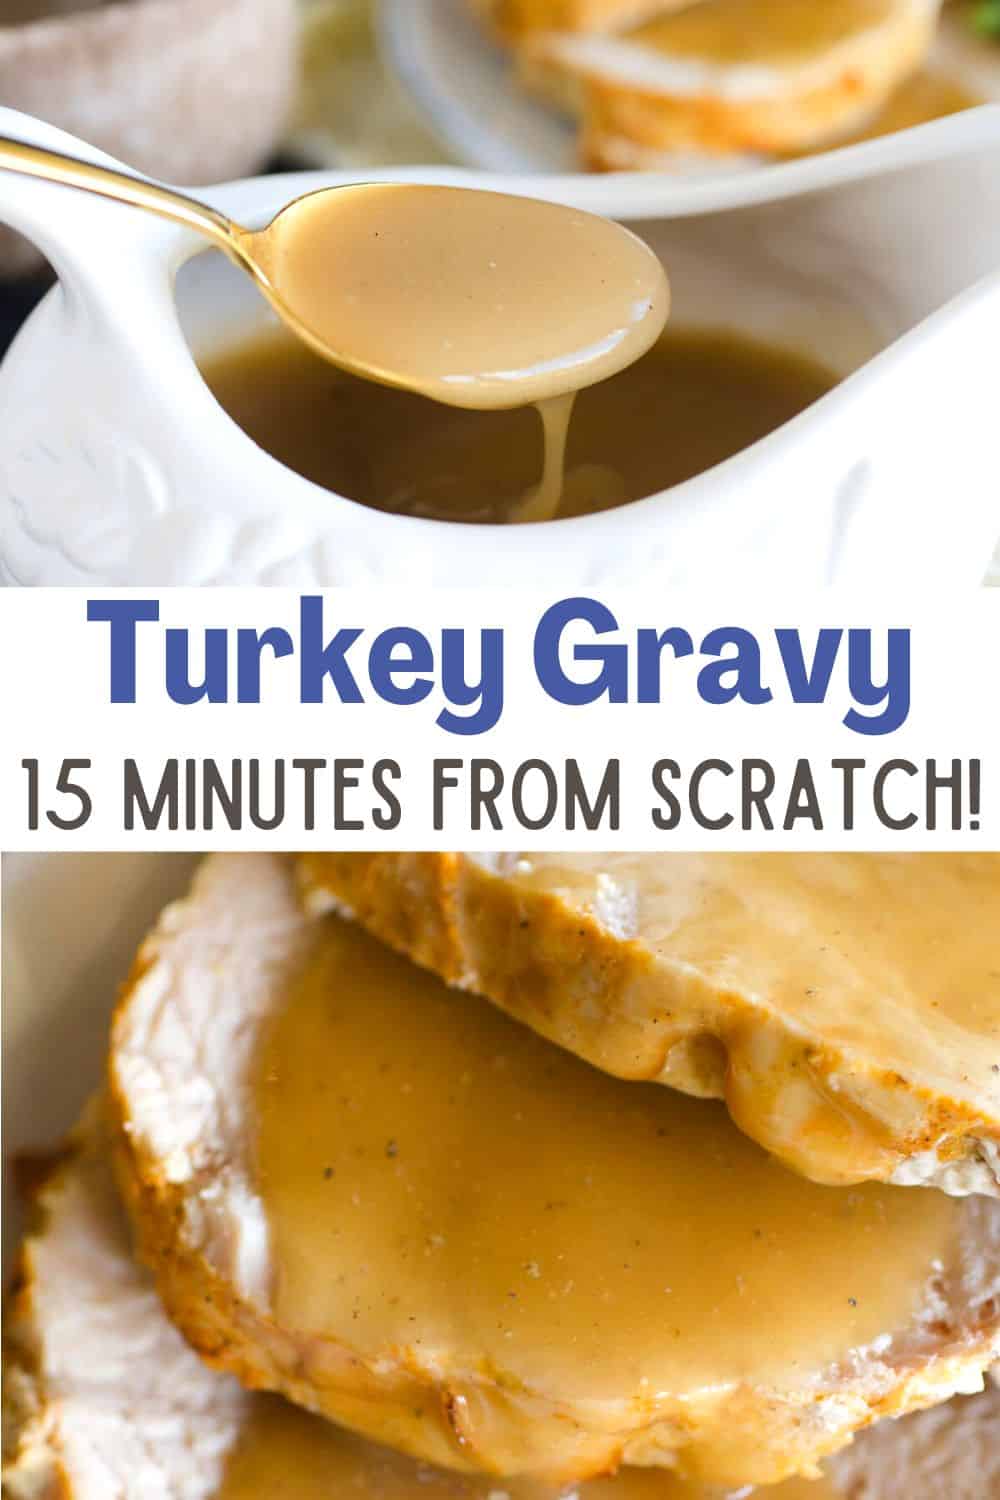 This turkey gravy is made from scratch in 15 minutes! Full of flavor from turkey drippings, this is the BEST turkey gravy recipe. Don't have pan drippings? Use chicken stock instead!